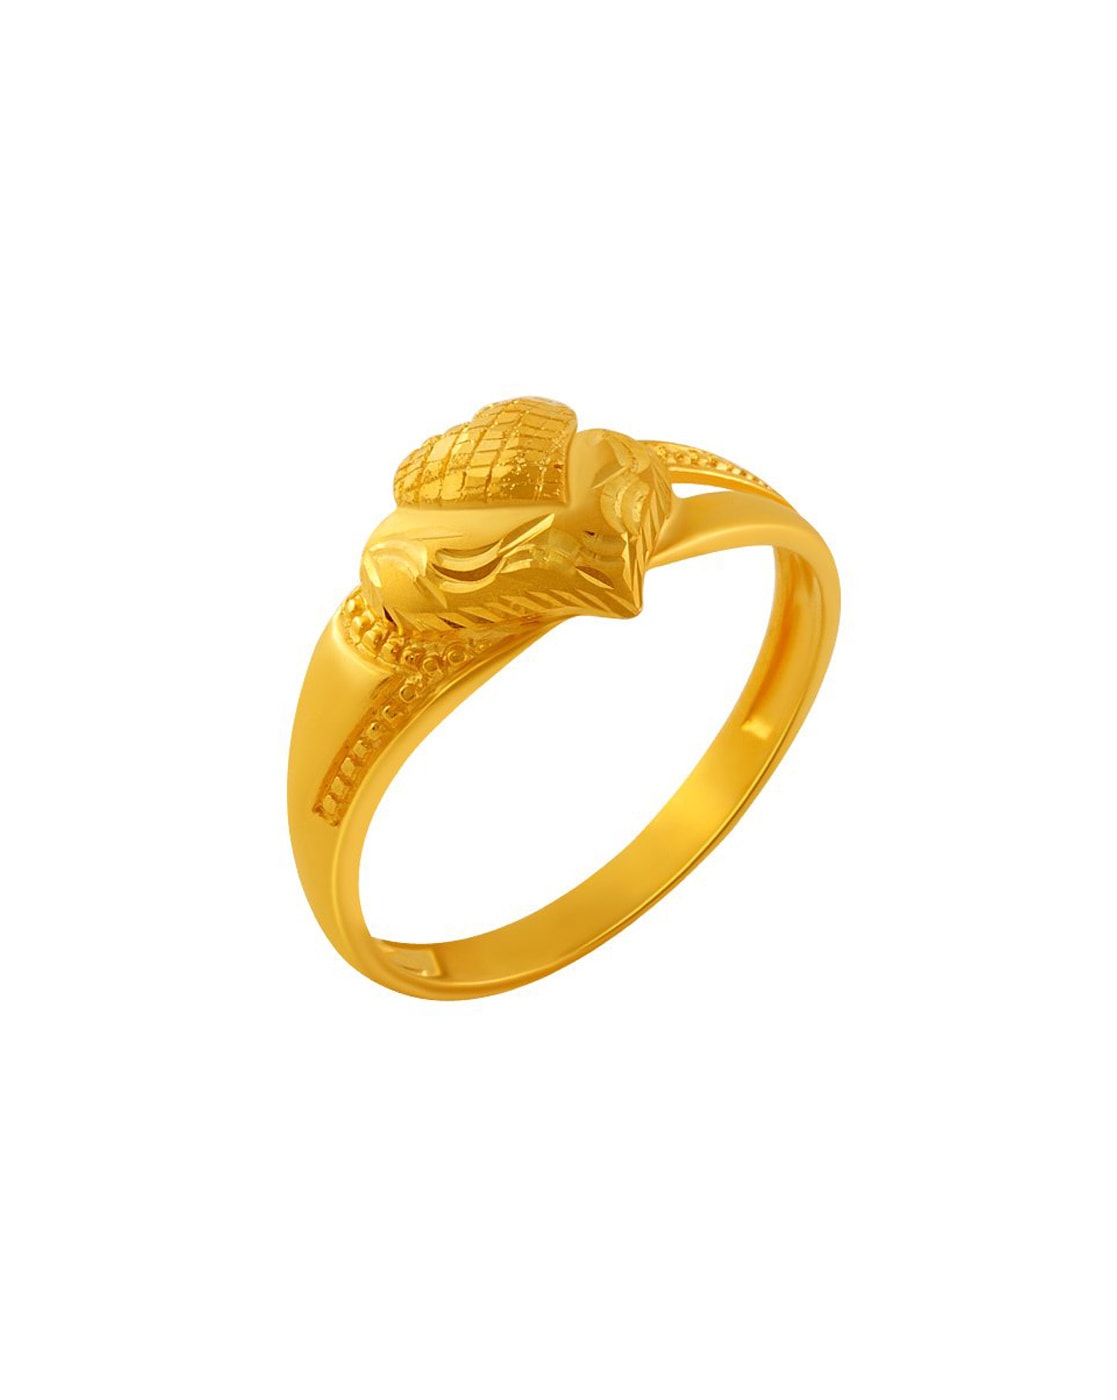 P.C. Chandra Jewellers 22k (916) BIS Hallmark Yellow Gold Ring for Men  (Size 21) - 6.13 Grams : Amazon.in: Fashion